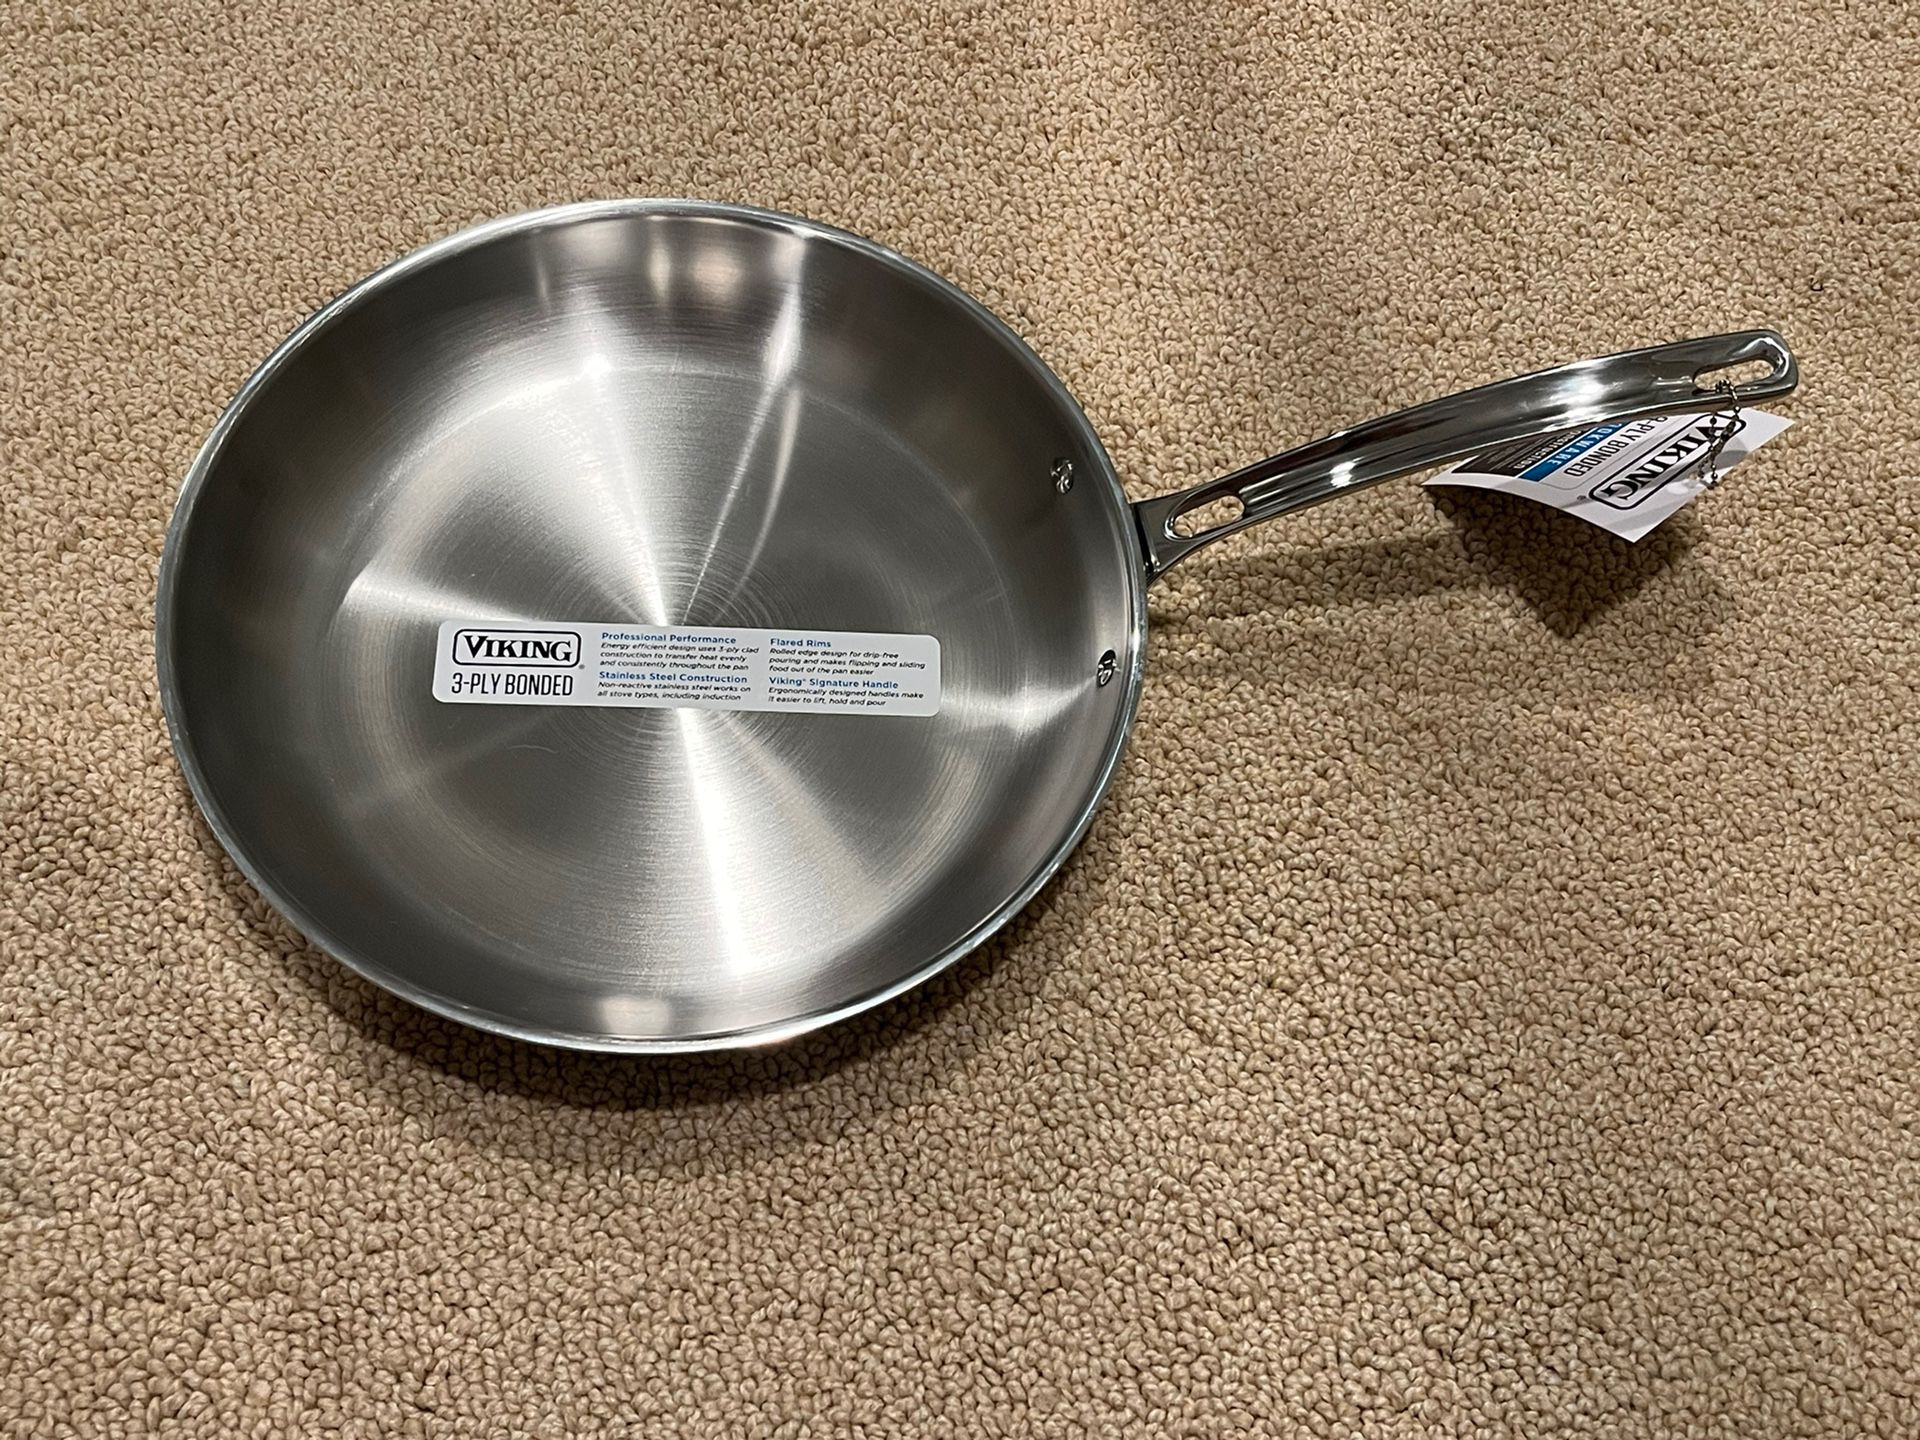 Viking 3-Ply Stainless Steel Fry Pan 12 Inch